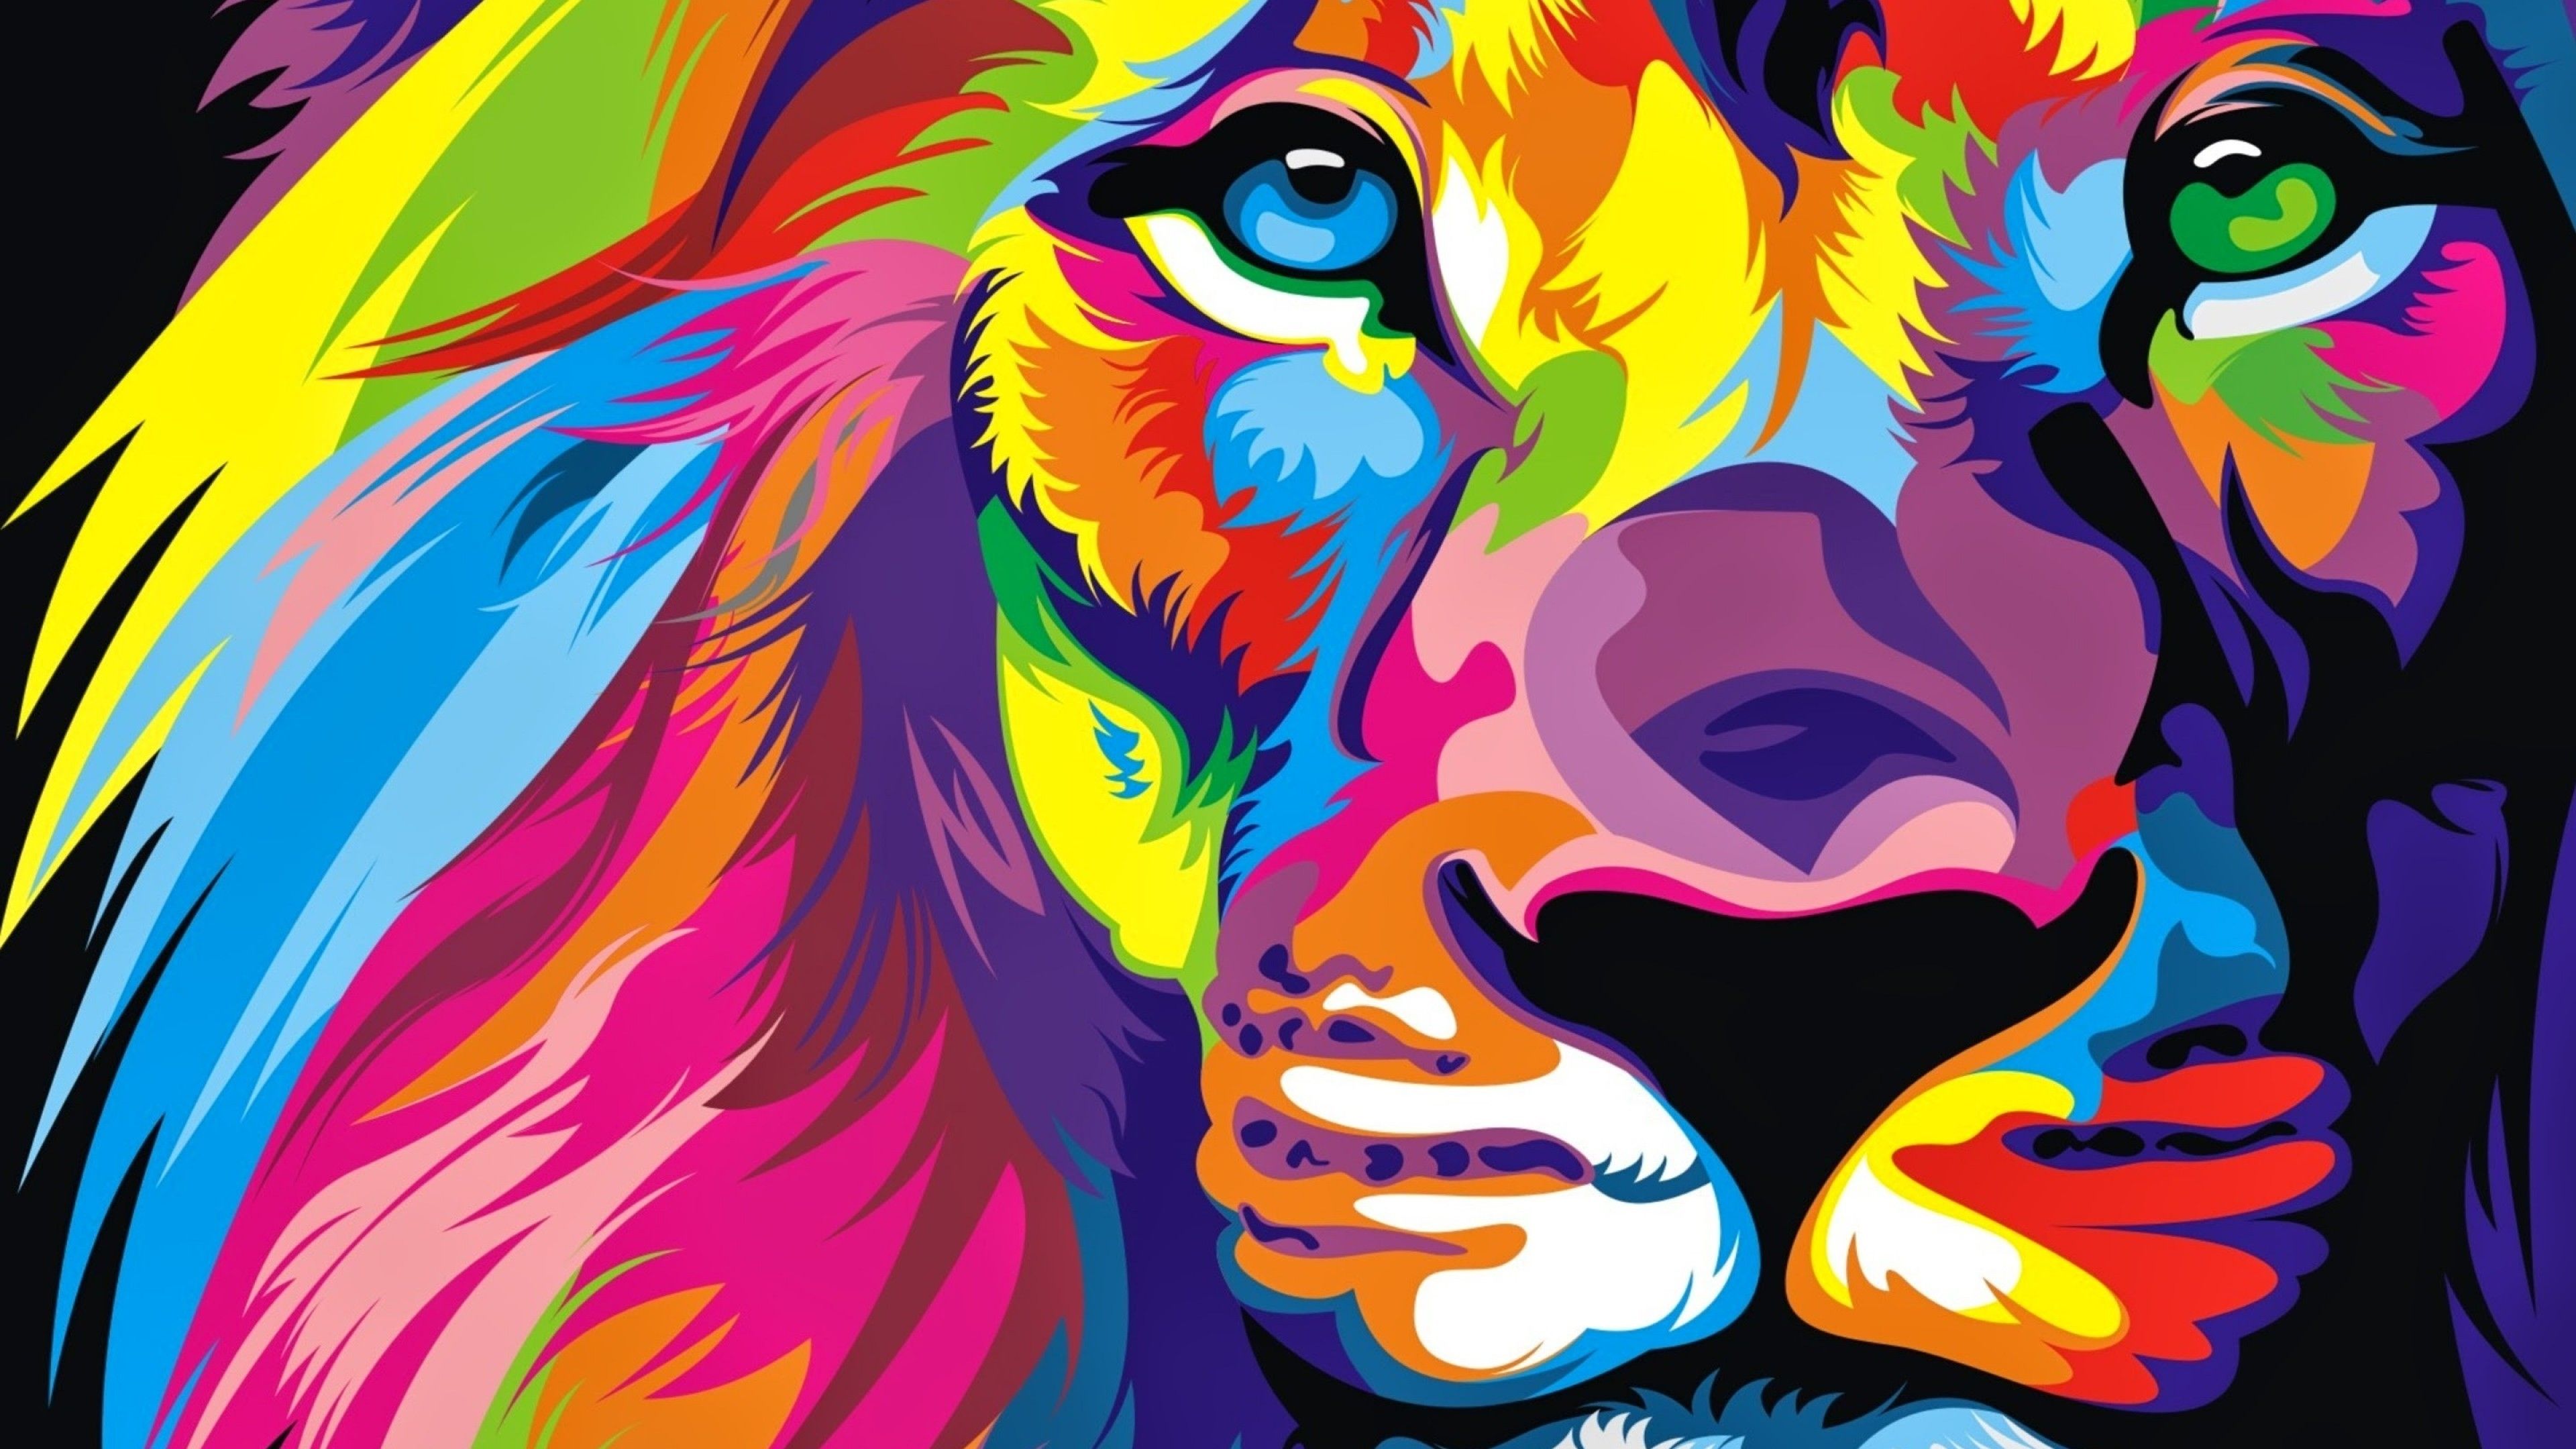 Colorful Lion Wallpaper, HD Colorful Lion Background on WallpaperBat